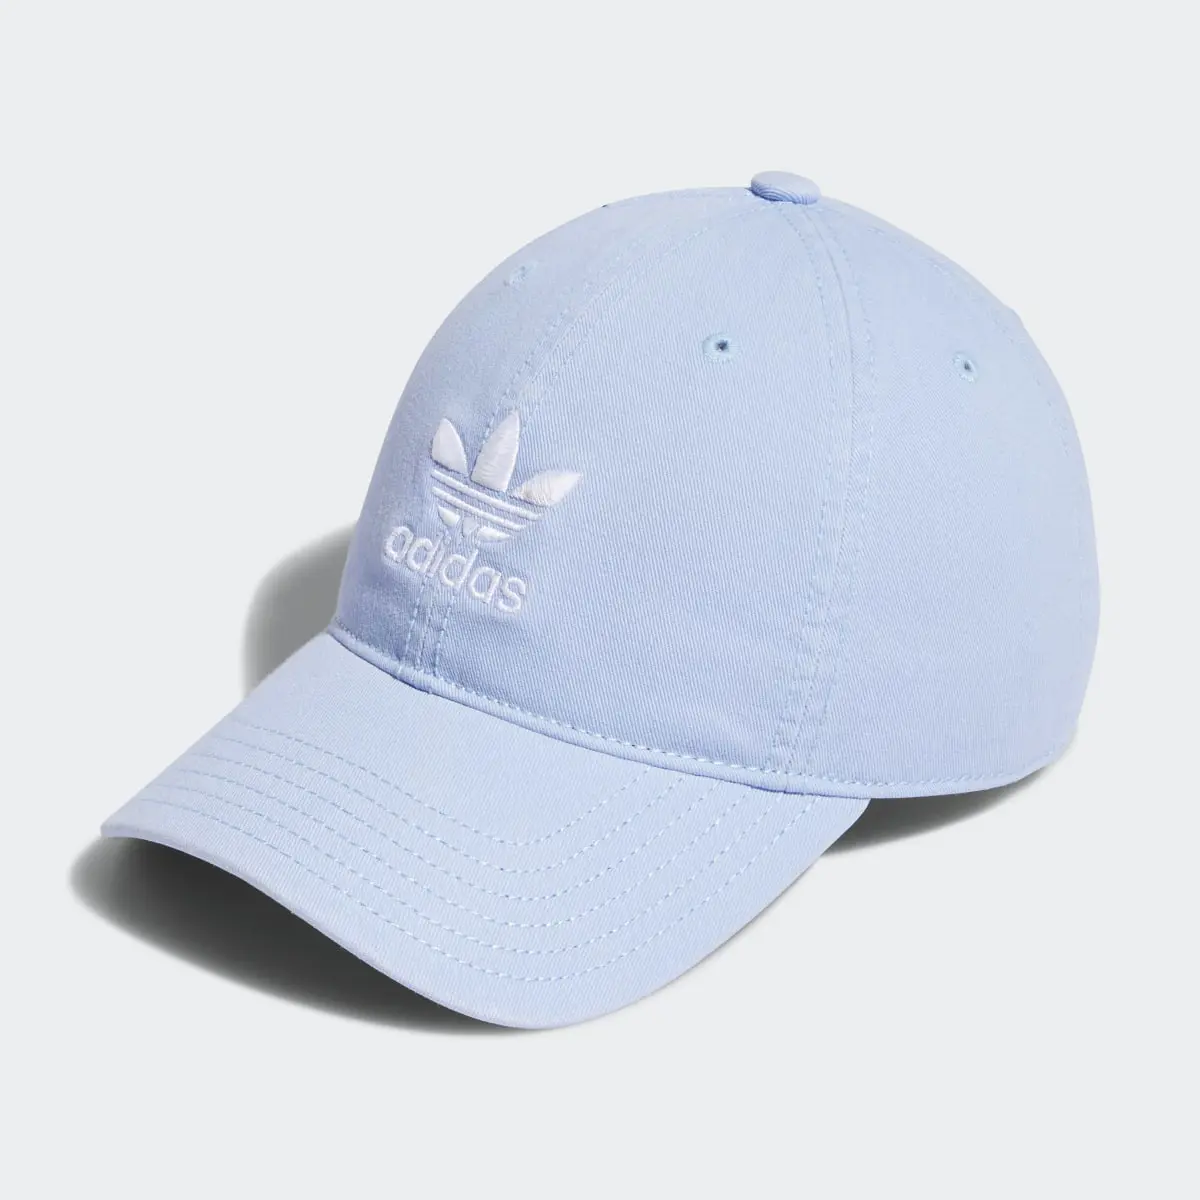 Adidas Relaxed Strap Back Hat. 2